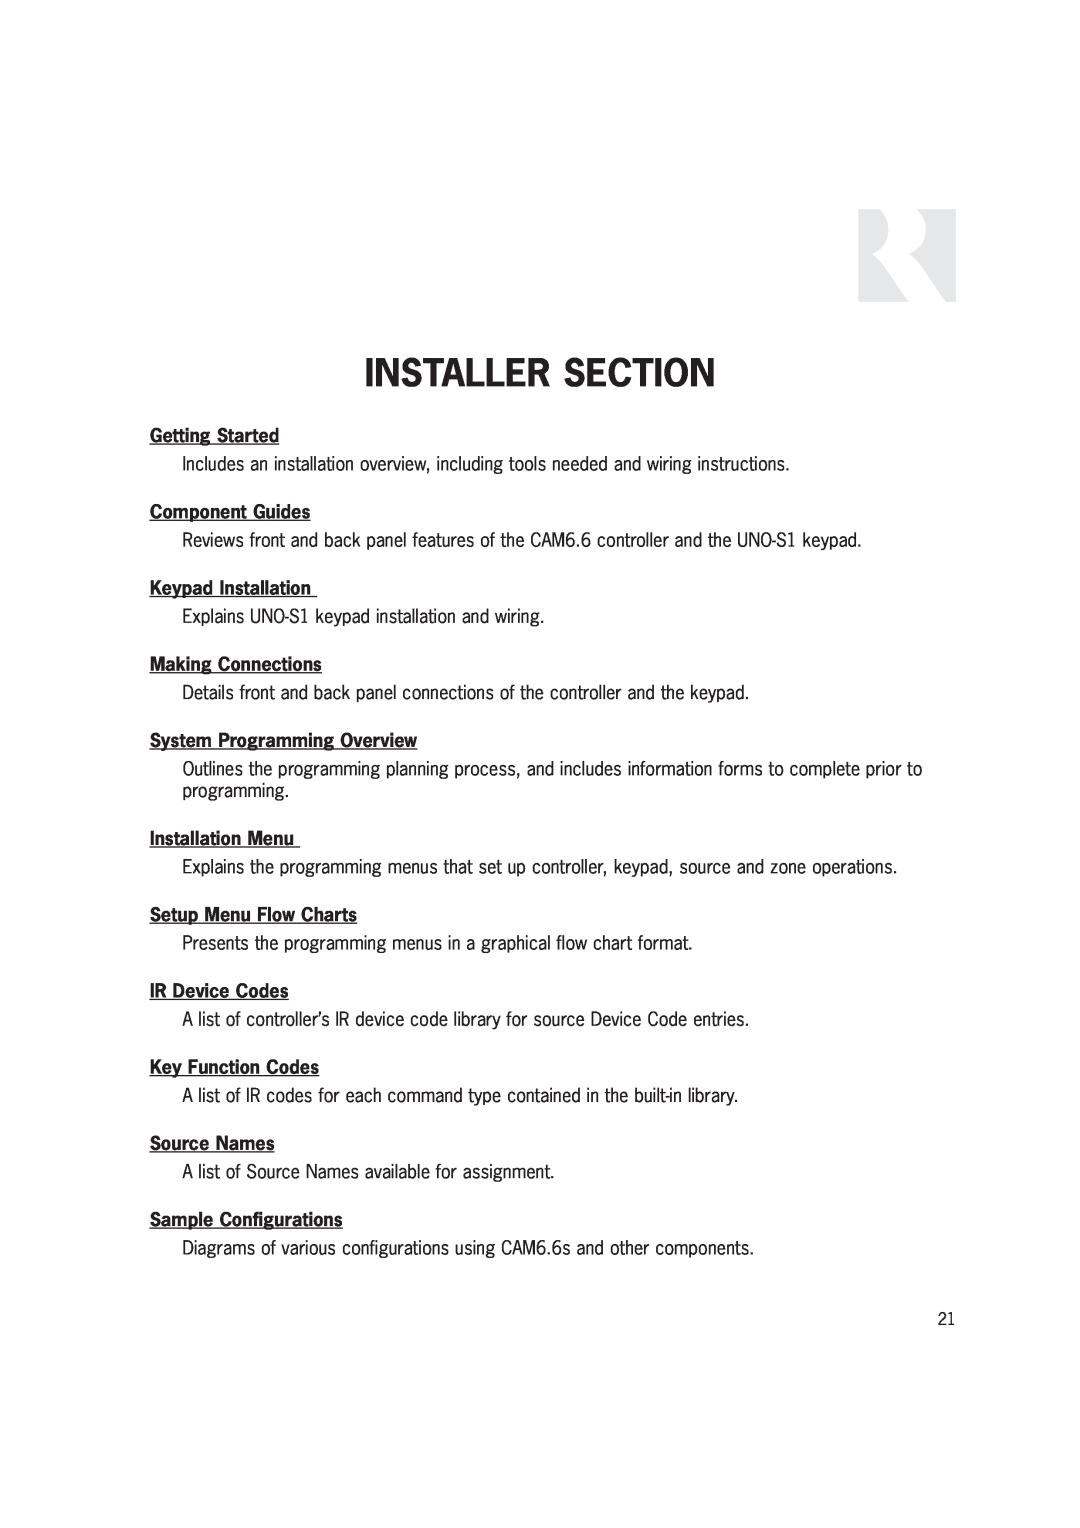 Russound CAM6.6T-S1 instruction manual Installer Section 